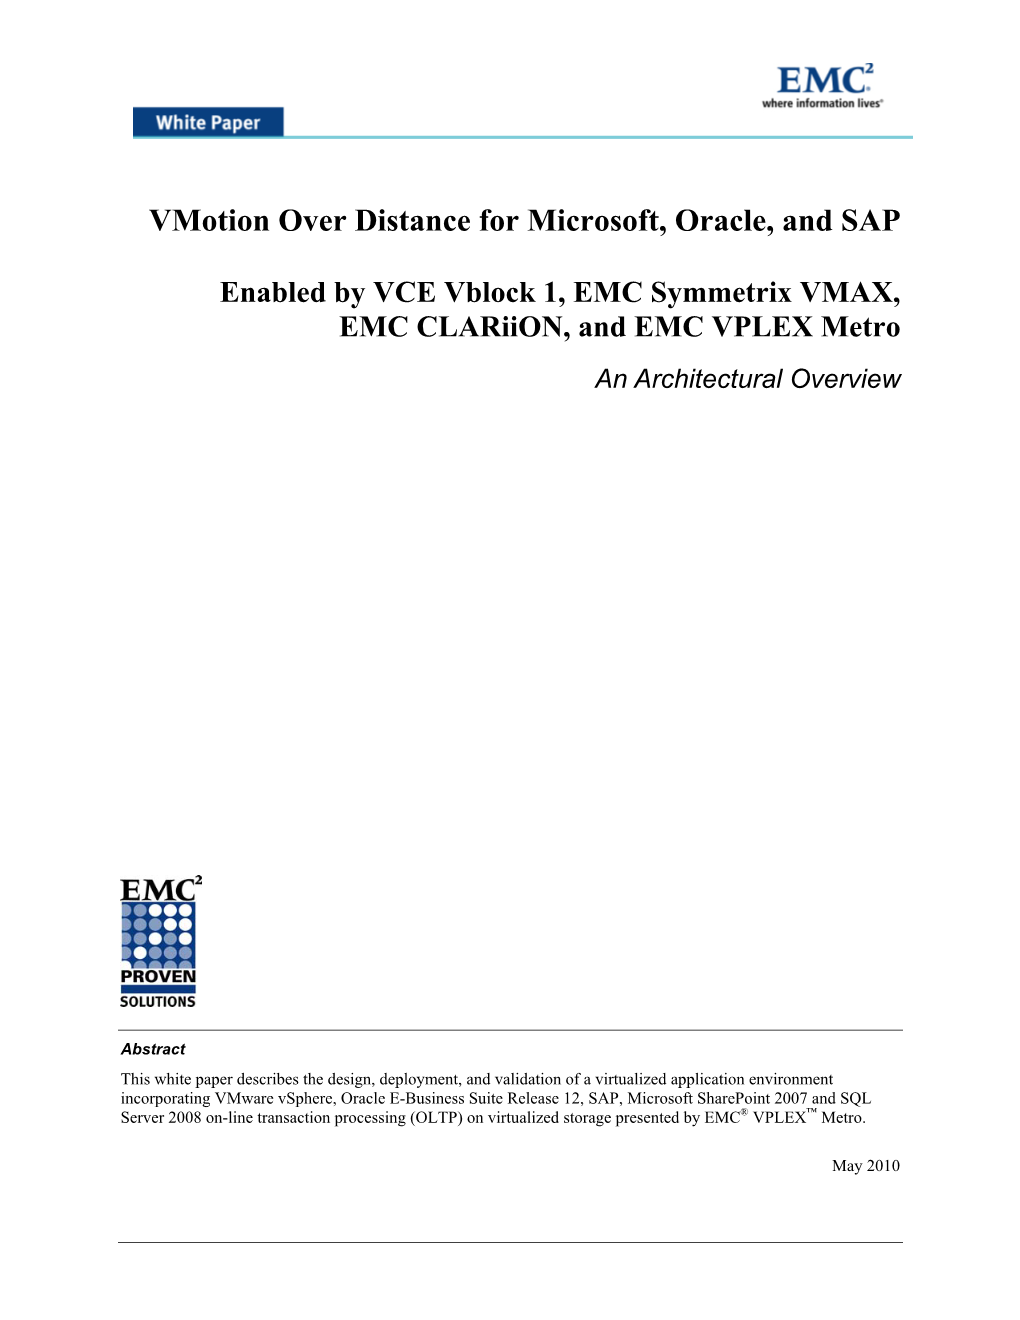 Vmotion Over Distance for Microsoft, Oracle, and SAP Enabled by VCE Vblock 1, EMC Symmetrix VMAX, EMC Clariion, and EMC VPLEX Metro—An Architectural Overview 2